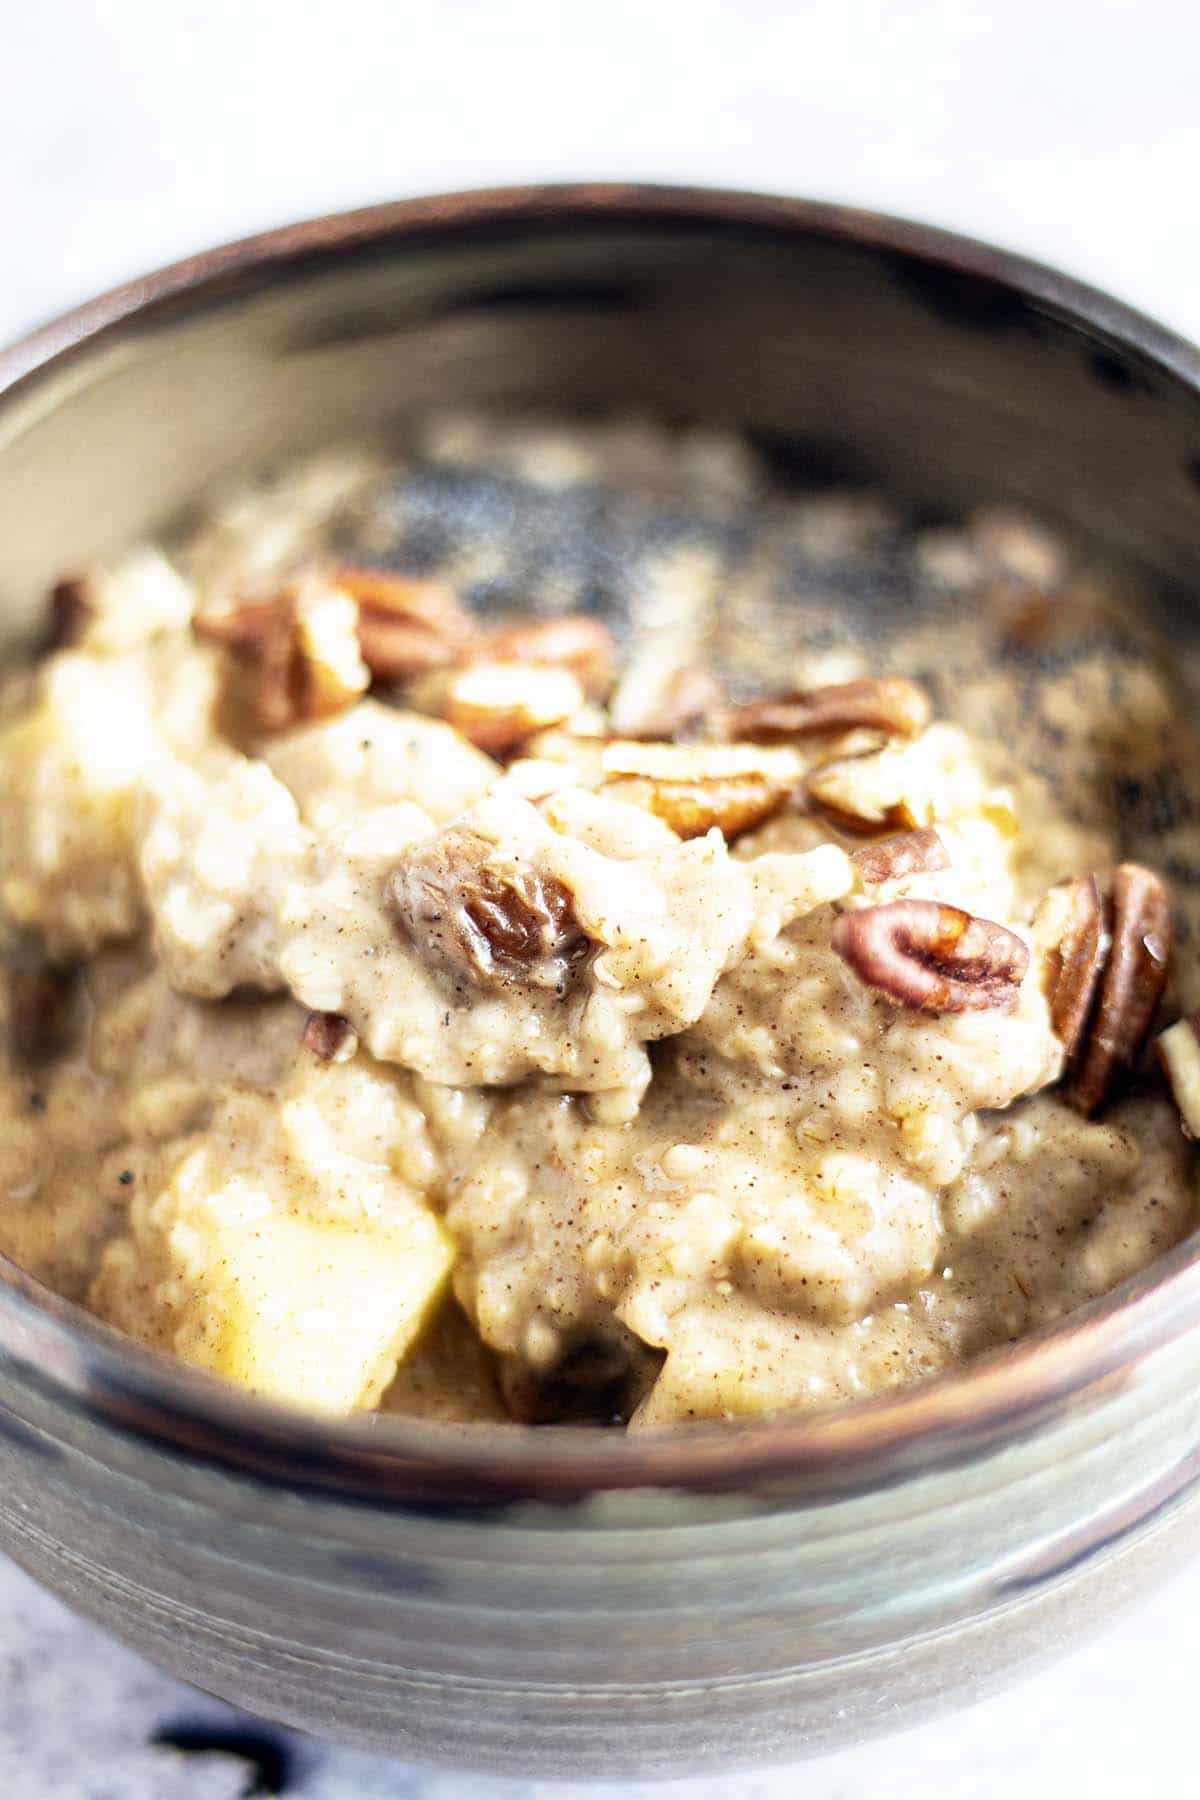 apple and cinnamon porridge in bowl topped with pecans